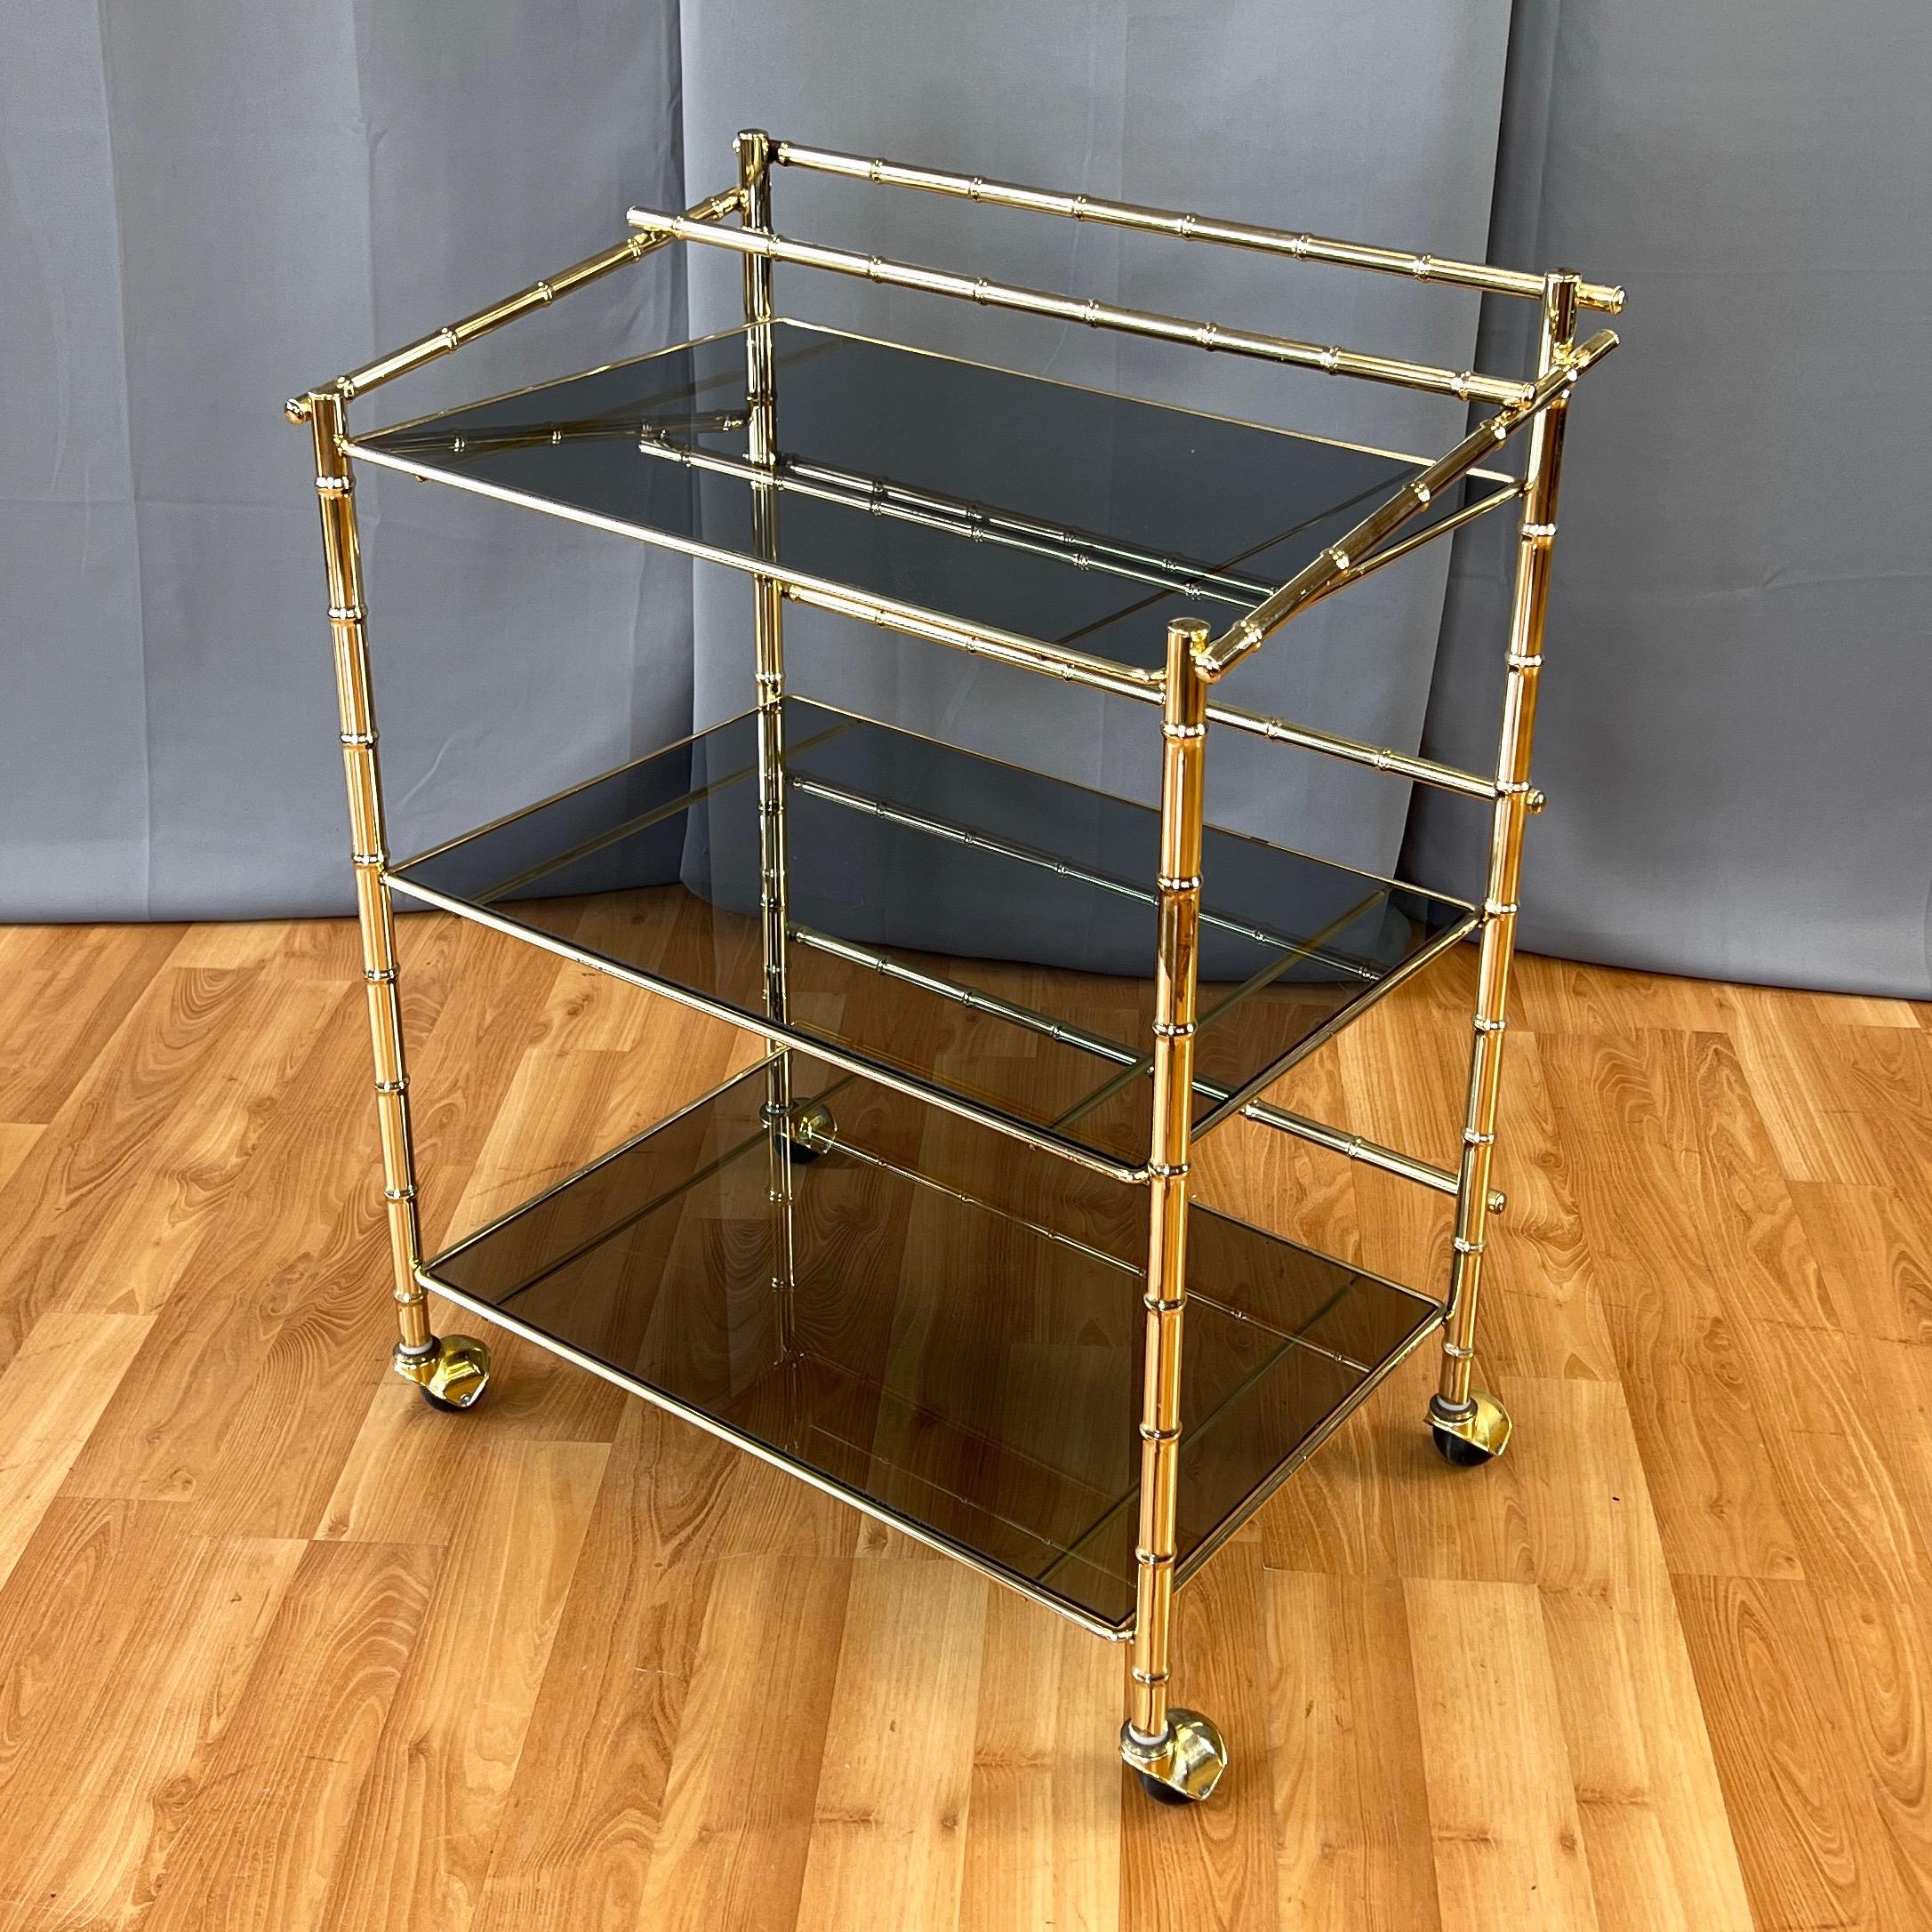 A 1970s Hollywood Regency brass faux bamboo bar cart or serving cart with three dark smoked glass tiers.

Very classy design defined by clean lines and just the right amount of Chippendale-like bamboo-accented style. Three tiers with spacious,